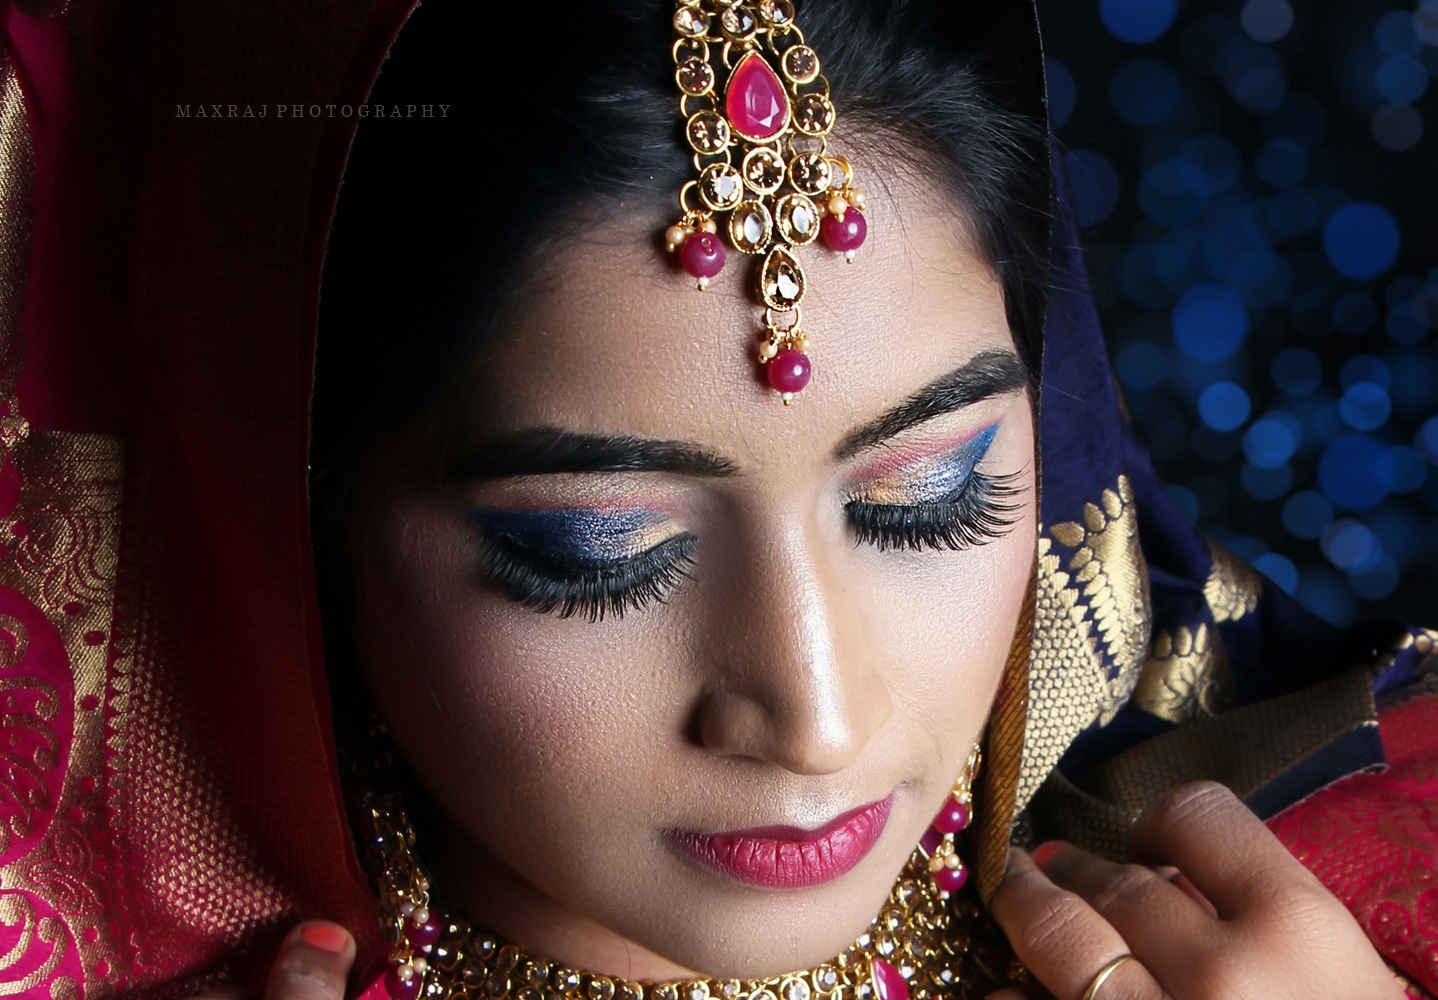 personal branding photographer in pune, top photographer in india